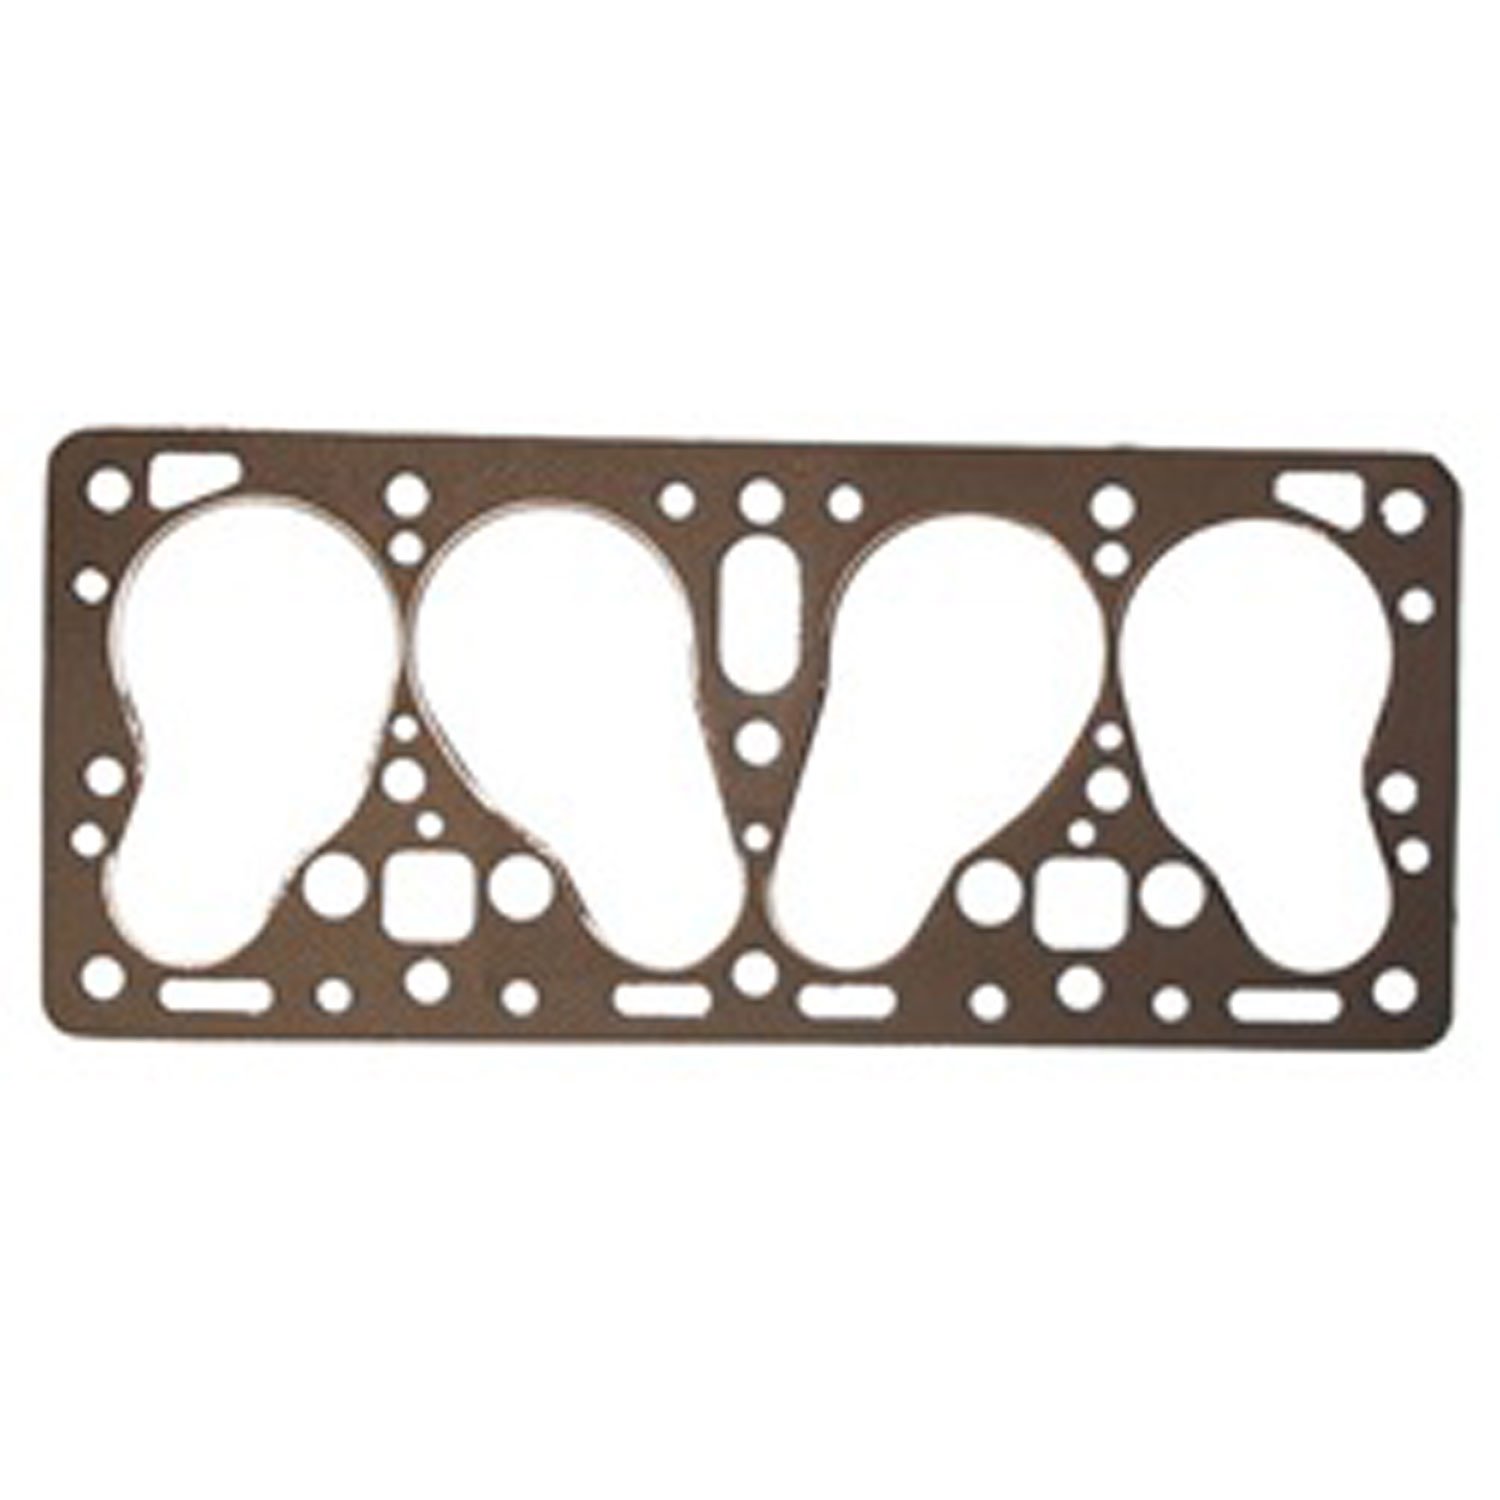 Replacement cylinder head gasket from Omix-ADA, Fits 134 cubic inch F-head engine found in 52-71 Willys and Jeep models